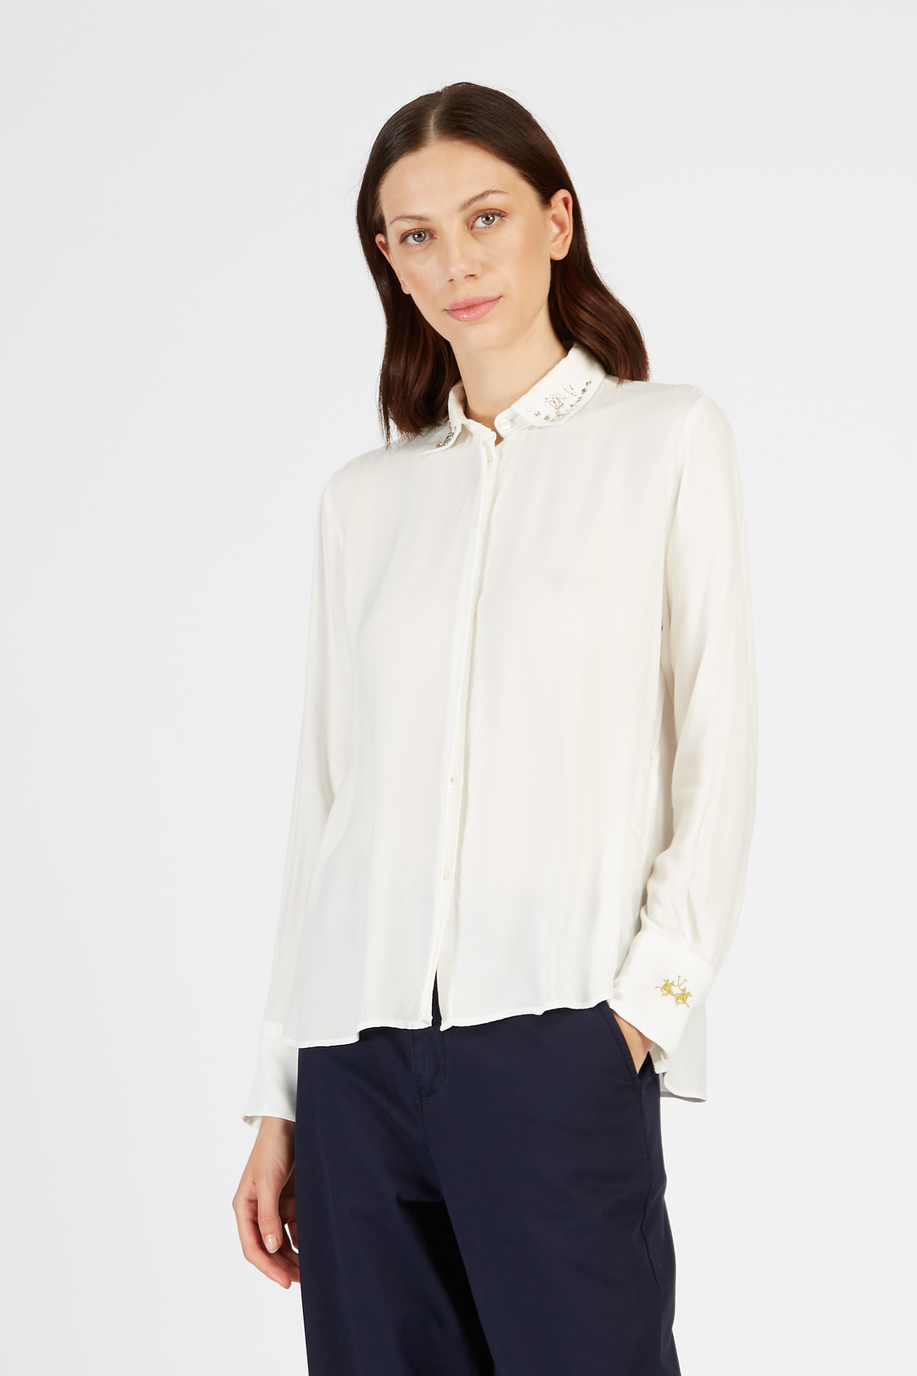 Solid color satin England shirt - Party season for her | La Martina - Official Online Shop